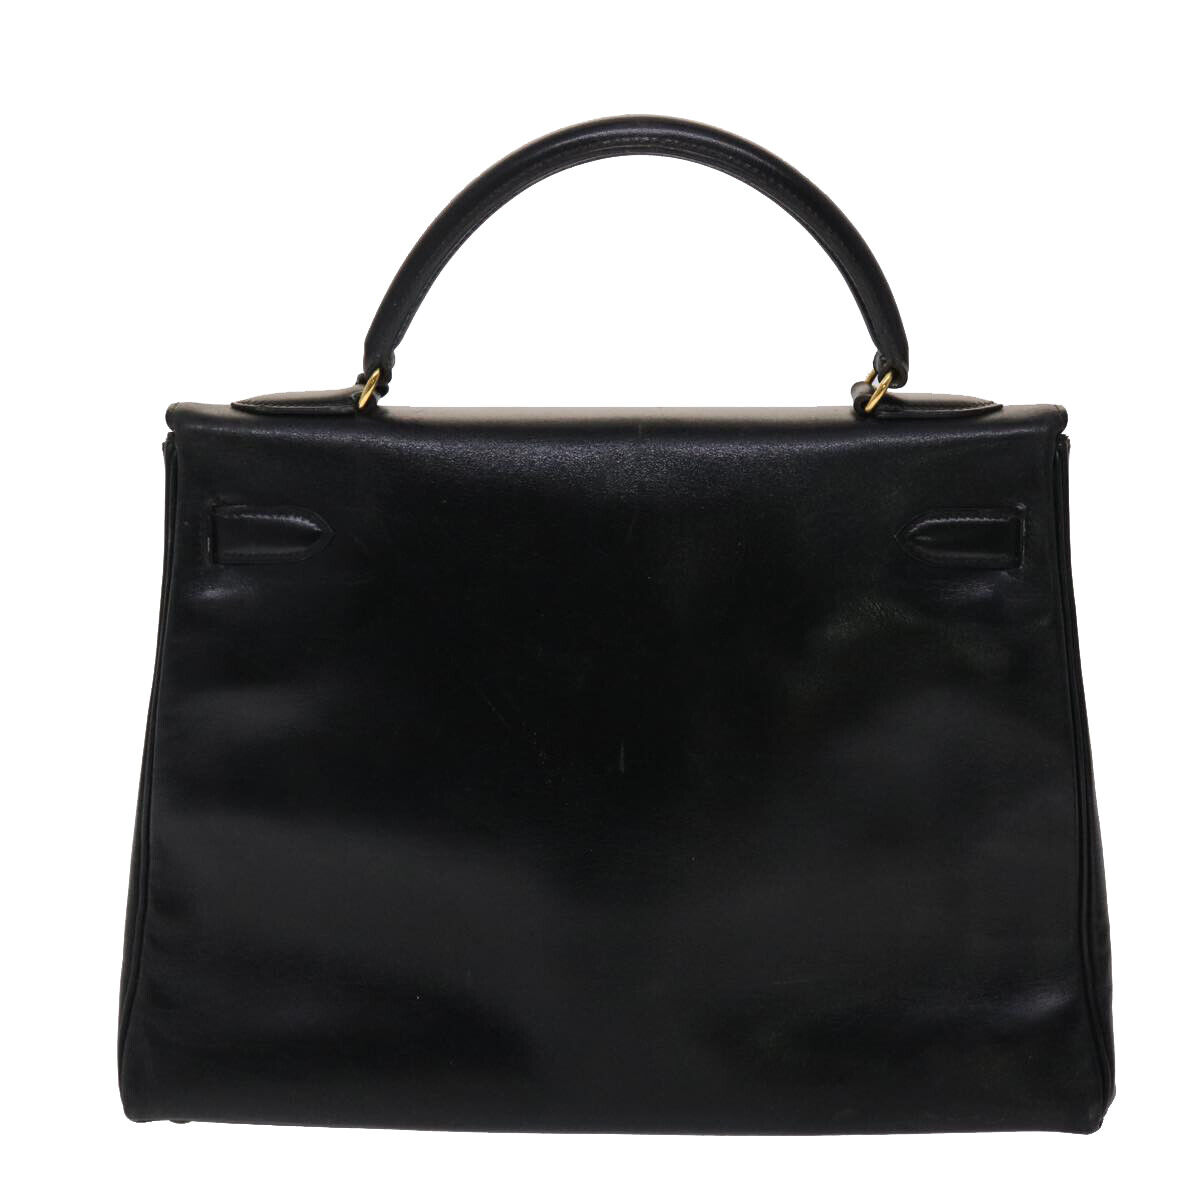 HERMES Kelly 32 Hand Bag Leather Black Auth ni110A - image 2